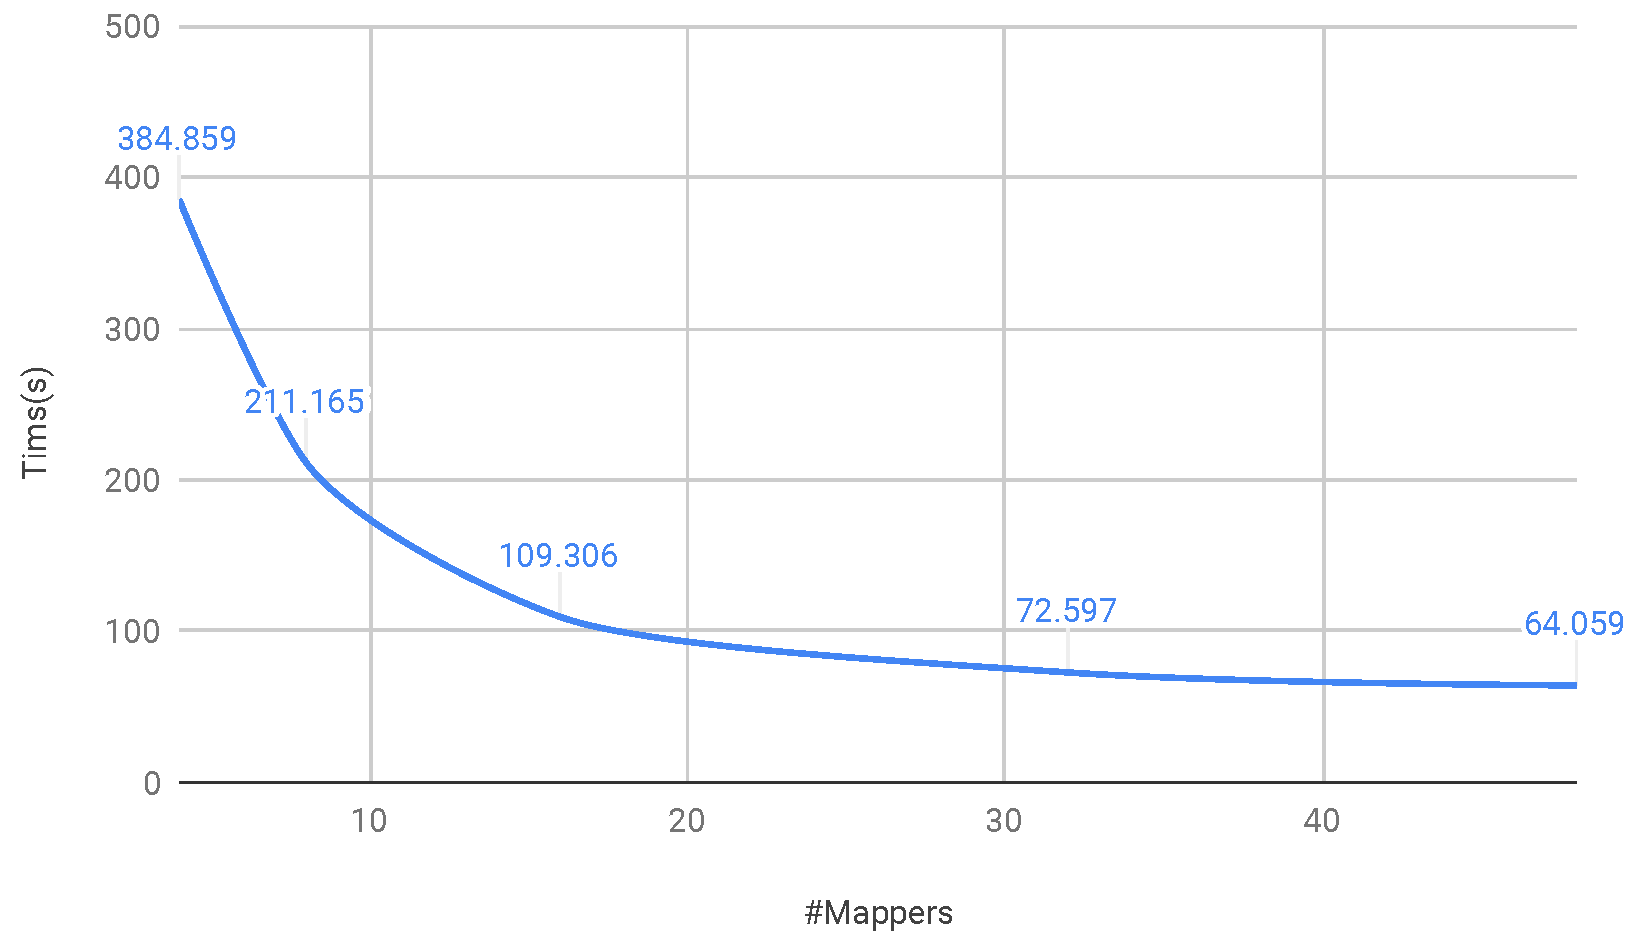 time vs. number of mappers